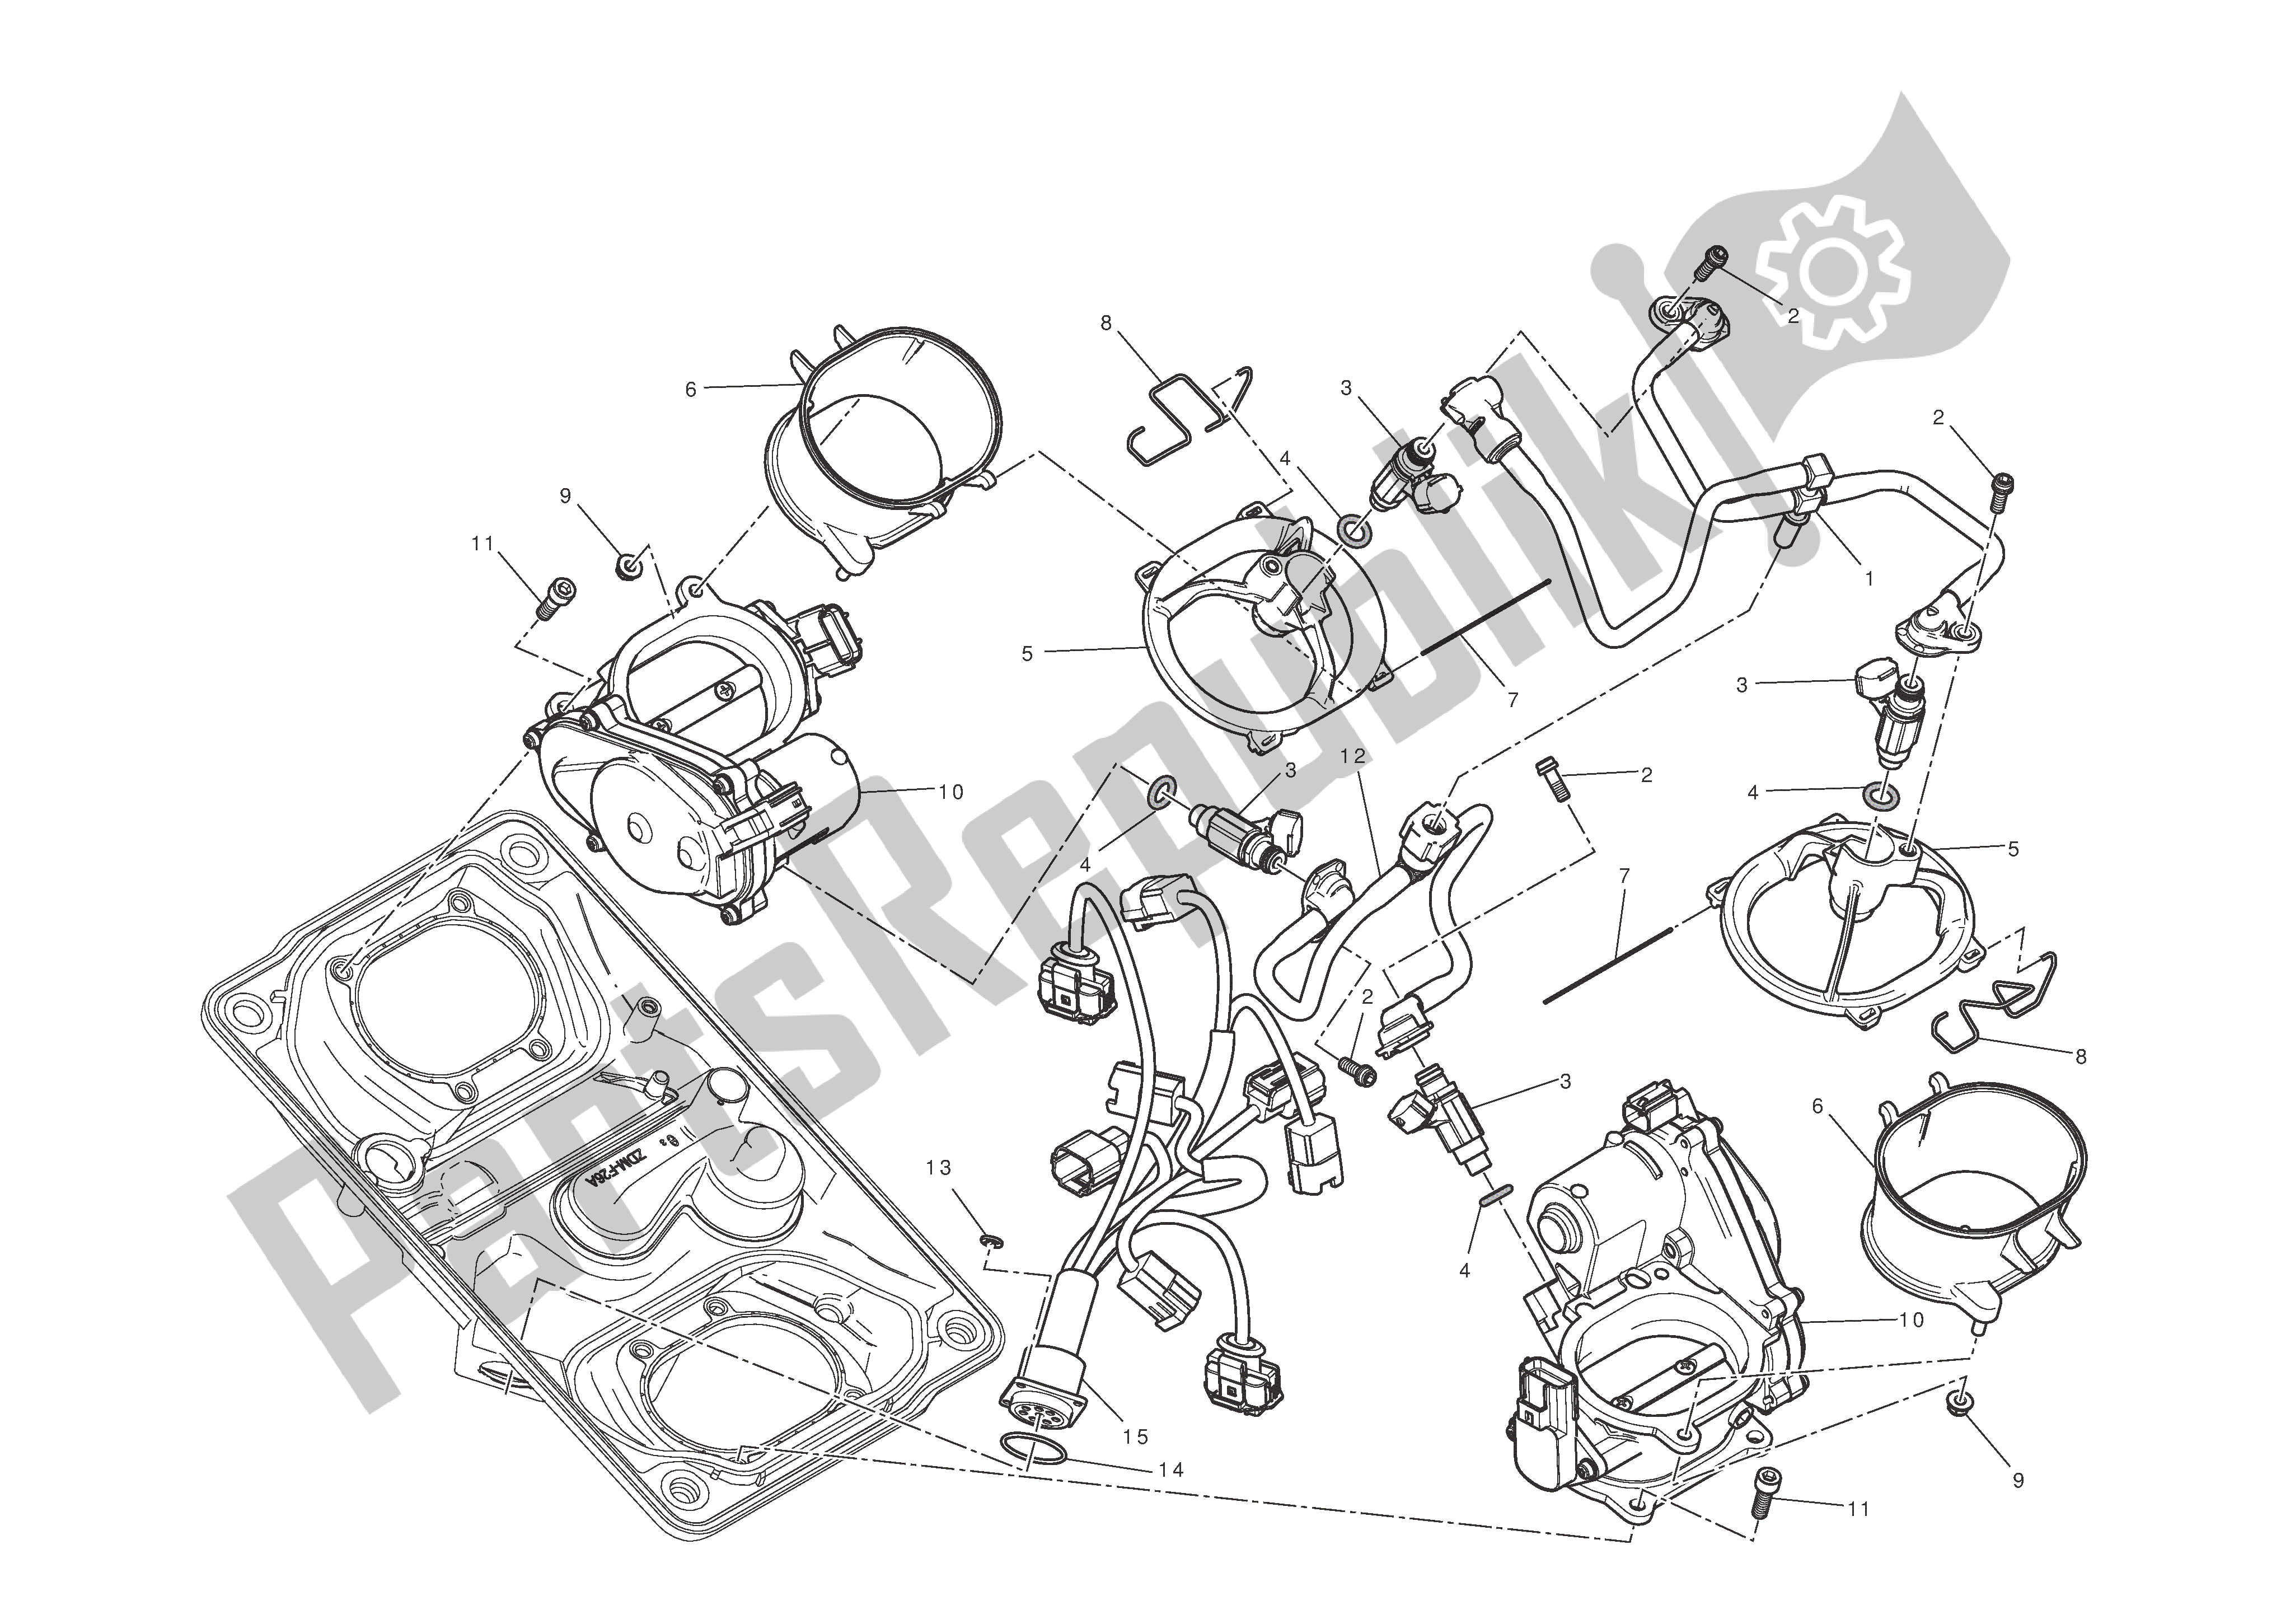 All parts for the Throttle Body of the Ducati 1199 Panigale S 2012